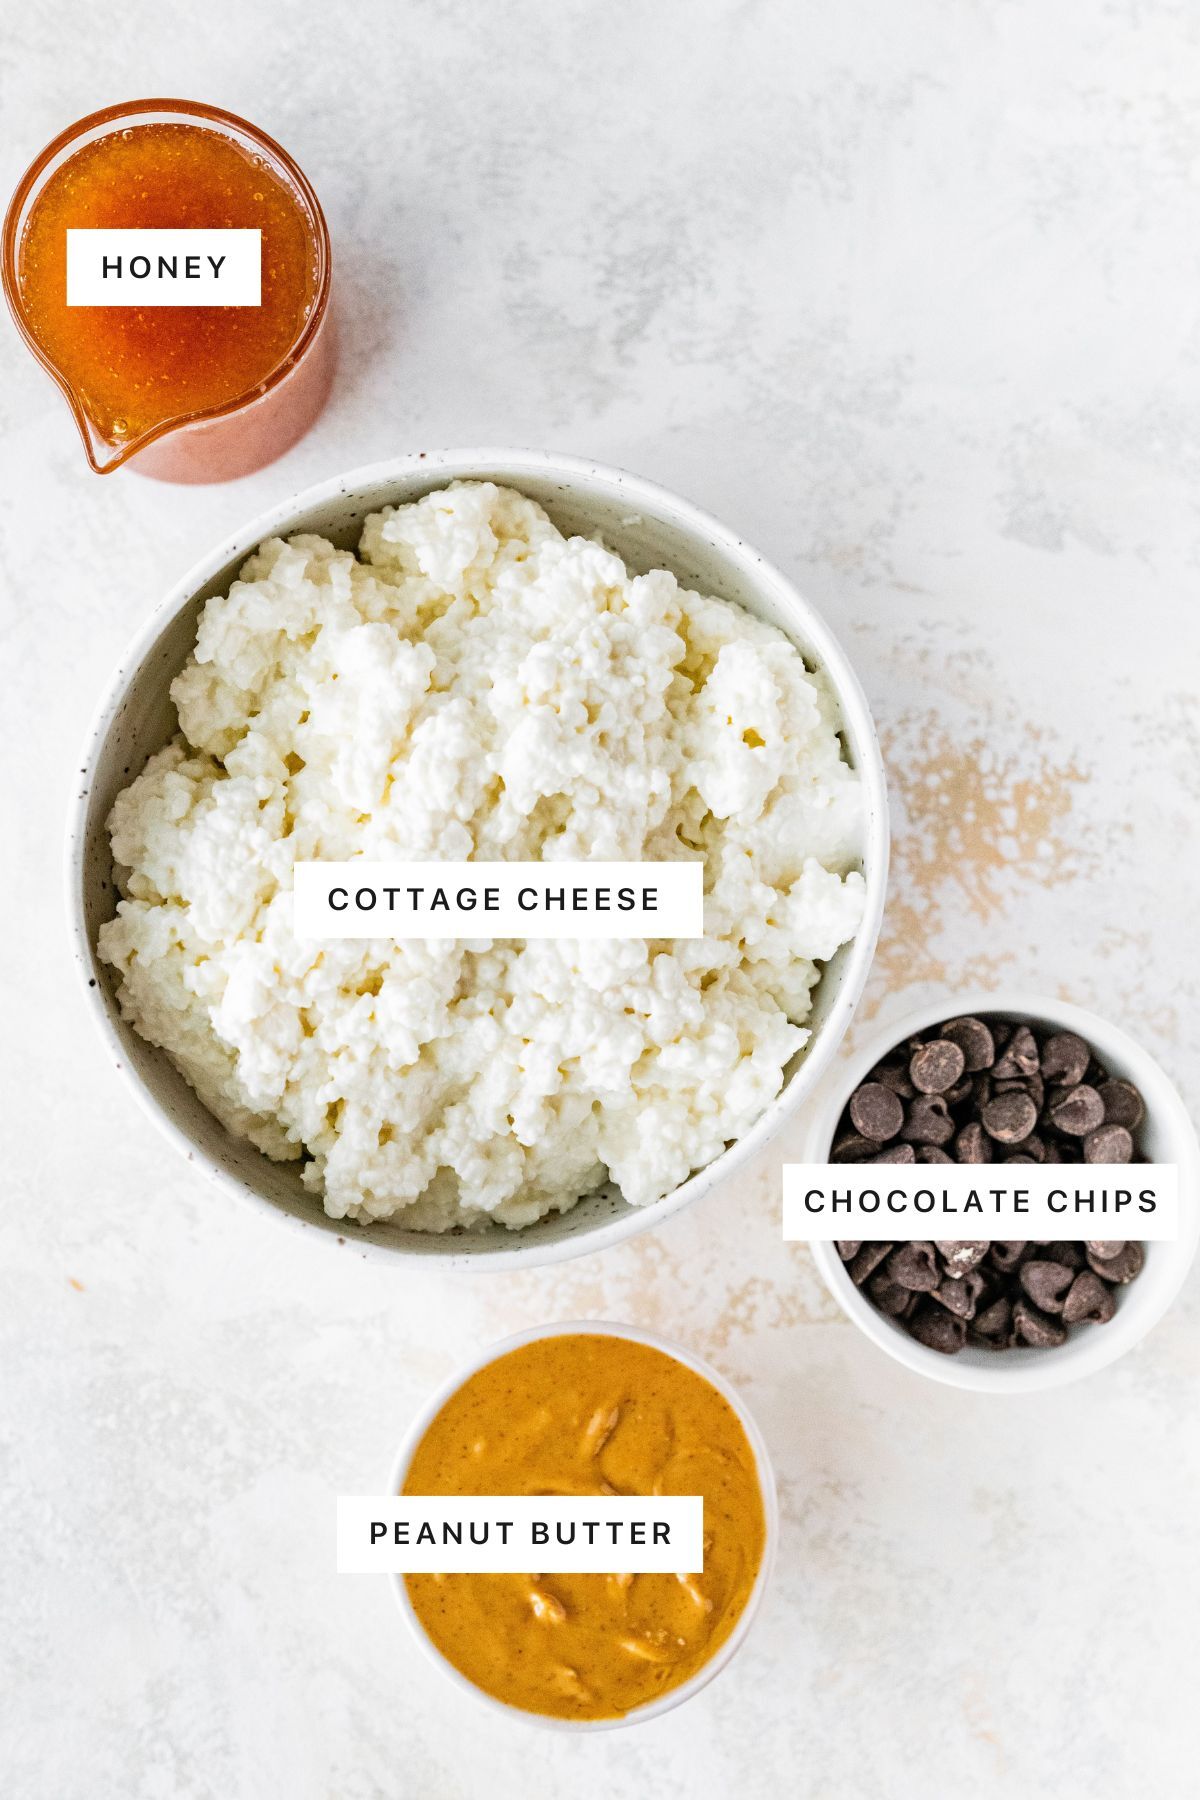 Ingredients for cottage cheese ice cream: honey, cottage cheese, chocolate chips and peanut butter.